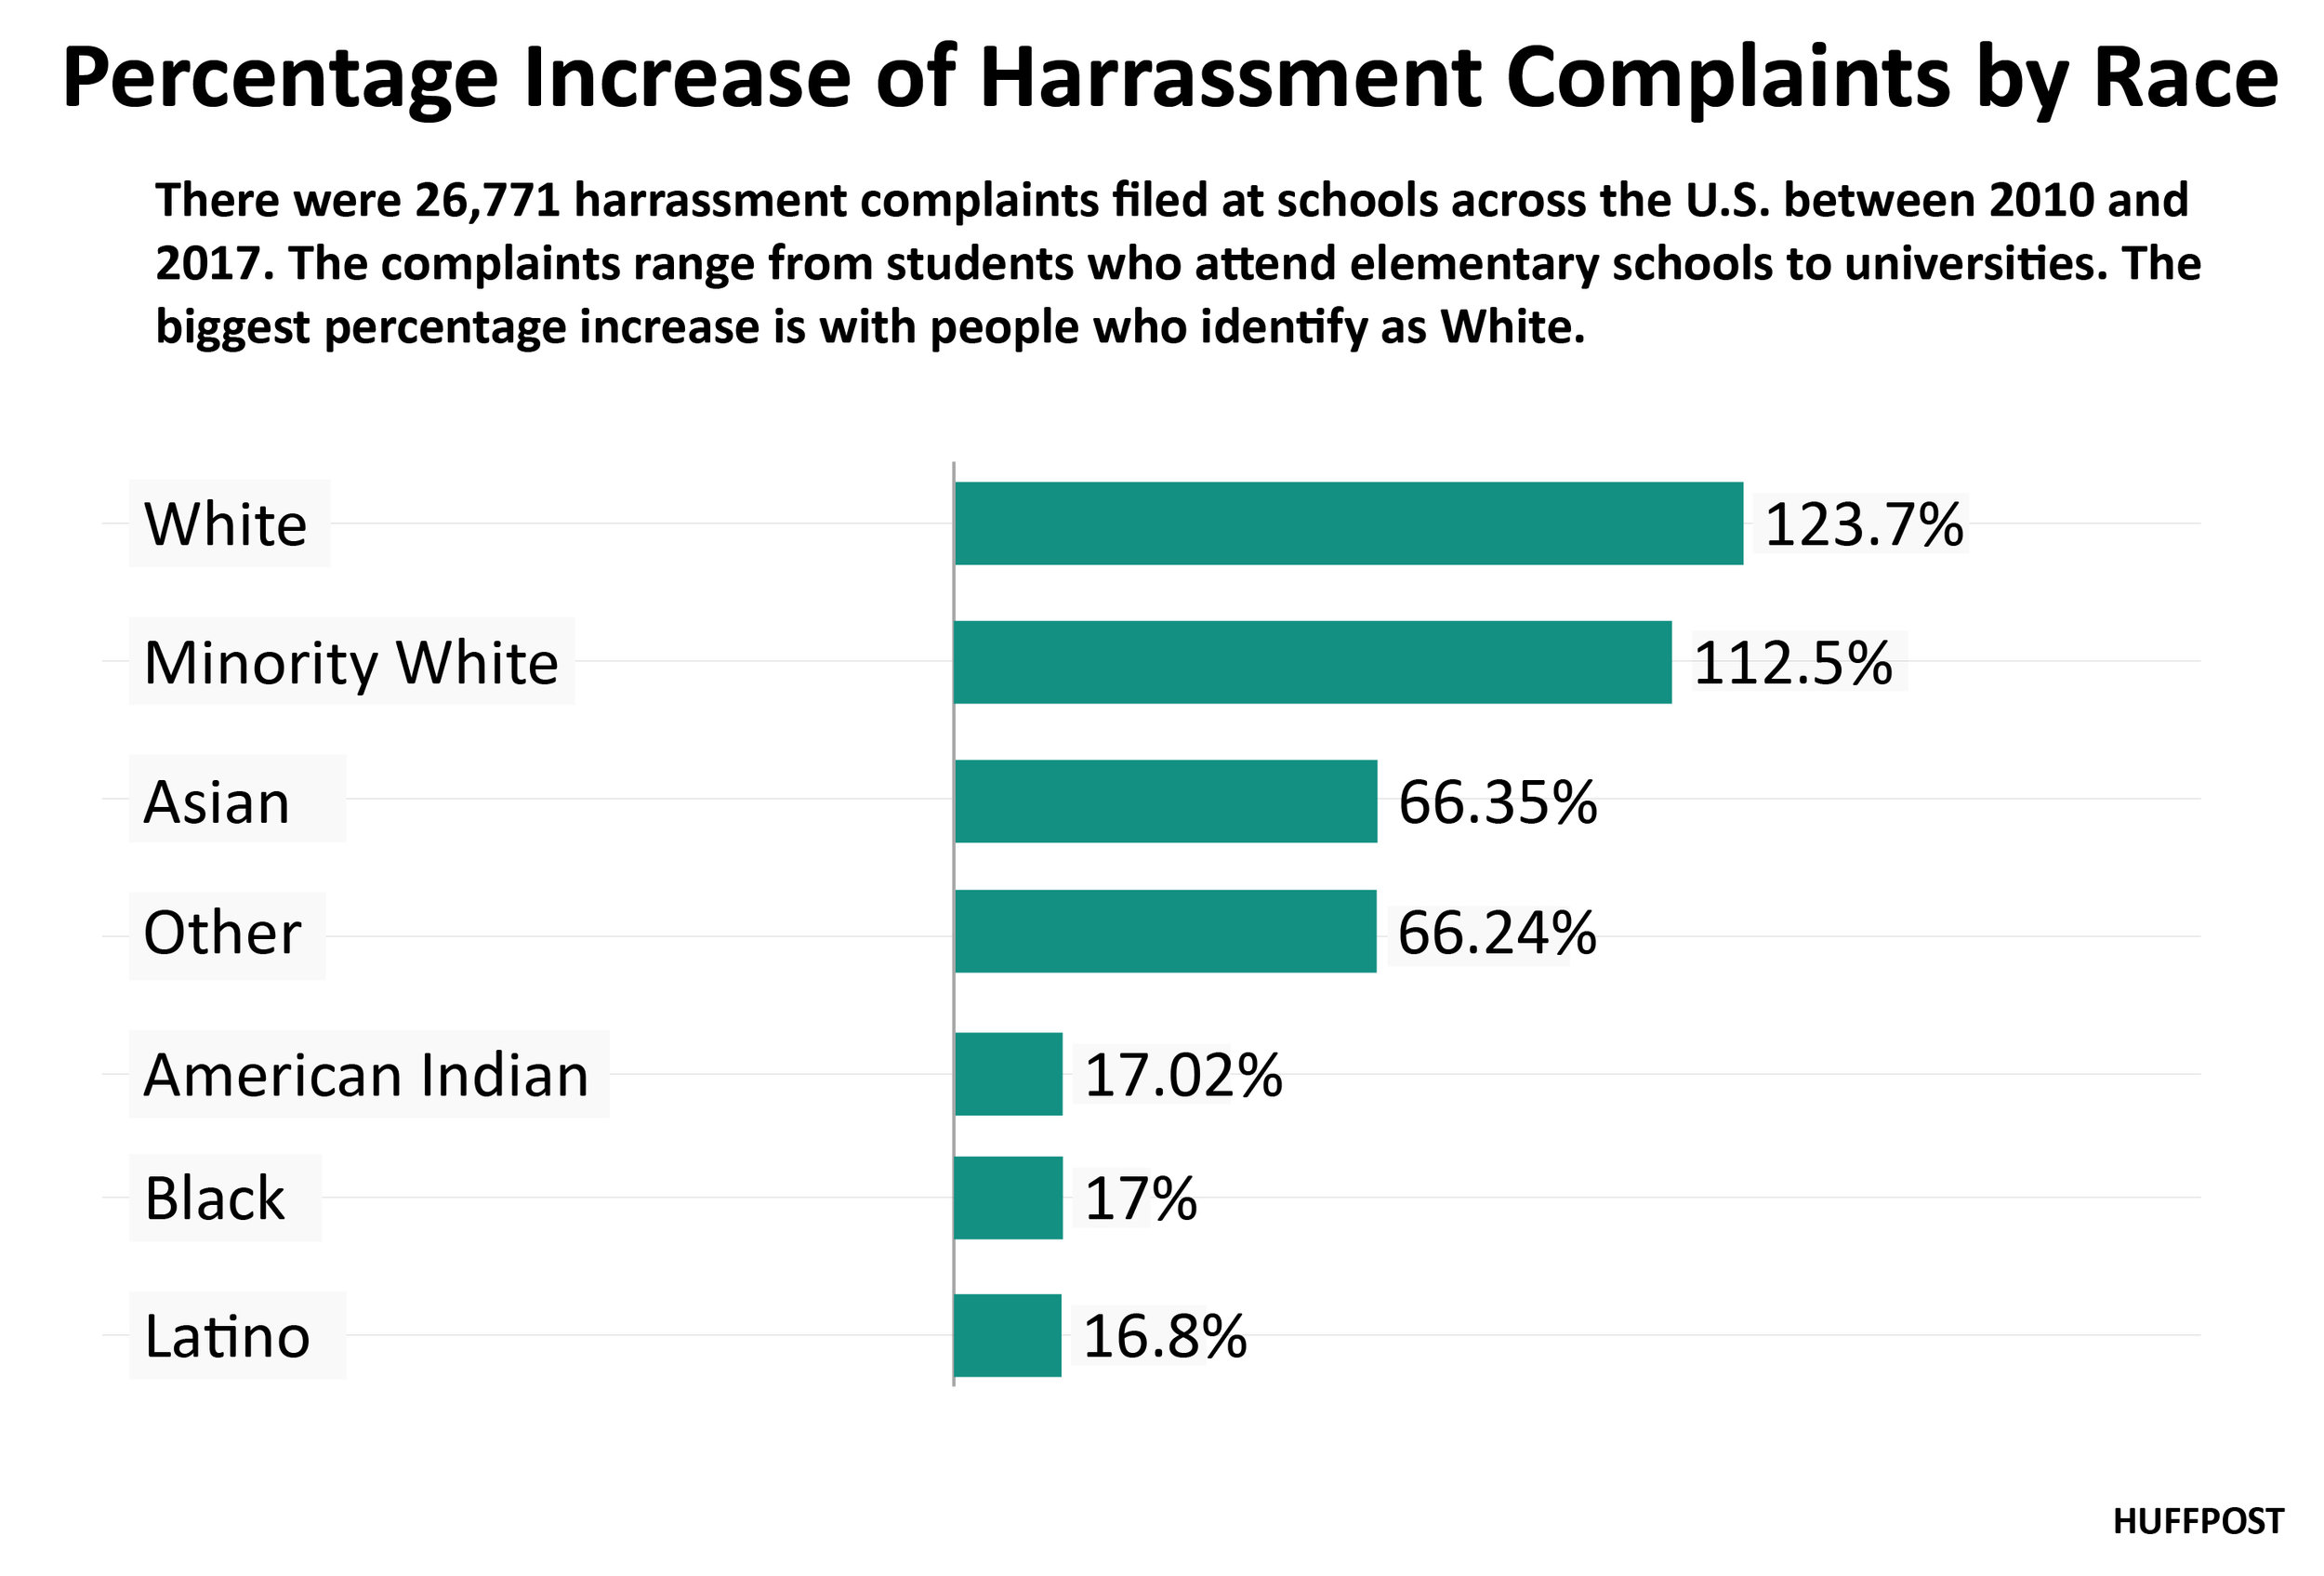 Percentage+of+Complaint+Increase+by+Race-01.jpg